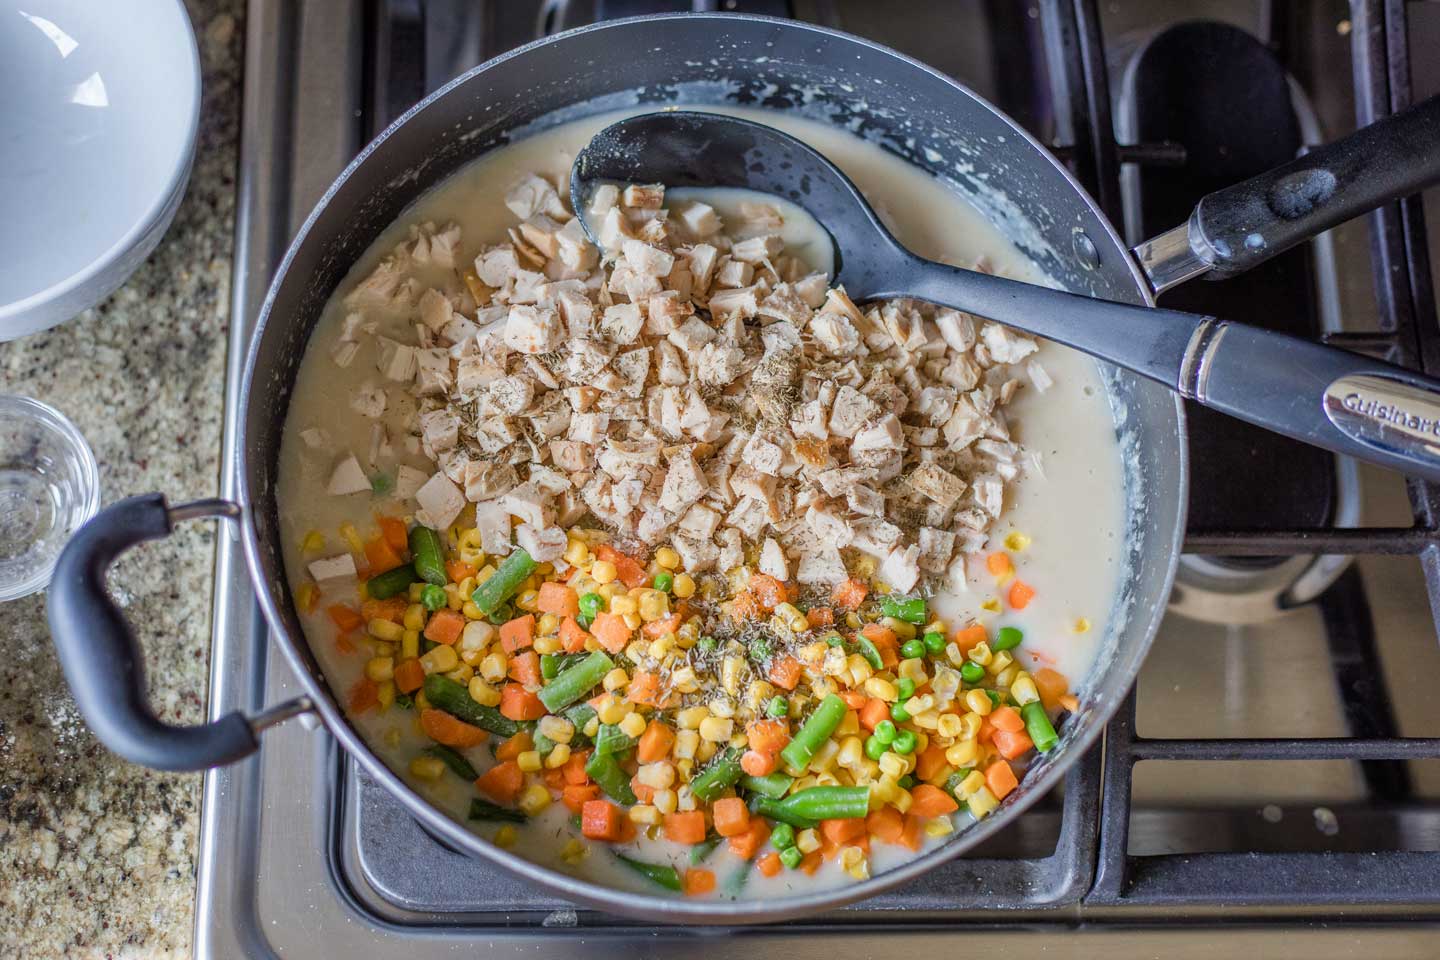 Overhead of a large skillet on a stove, with ingredients for pot pie filling just being stirred together, to show one idea of how to use up leftover turkey.